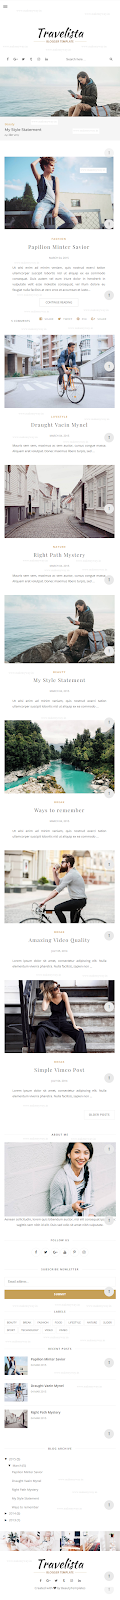 Travelista Tour Blogger Theme: Premium For Photography Template: Download Free 